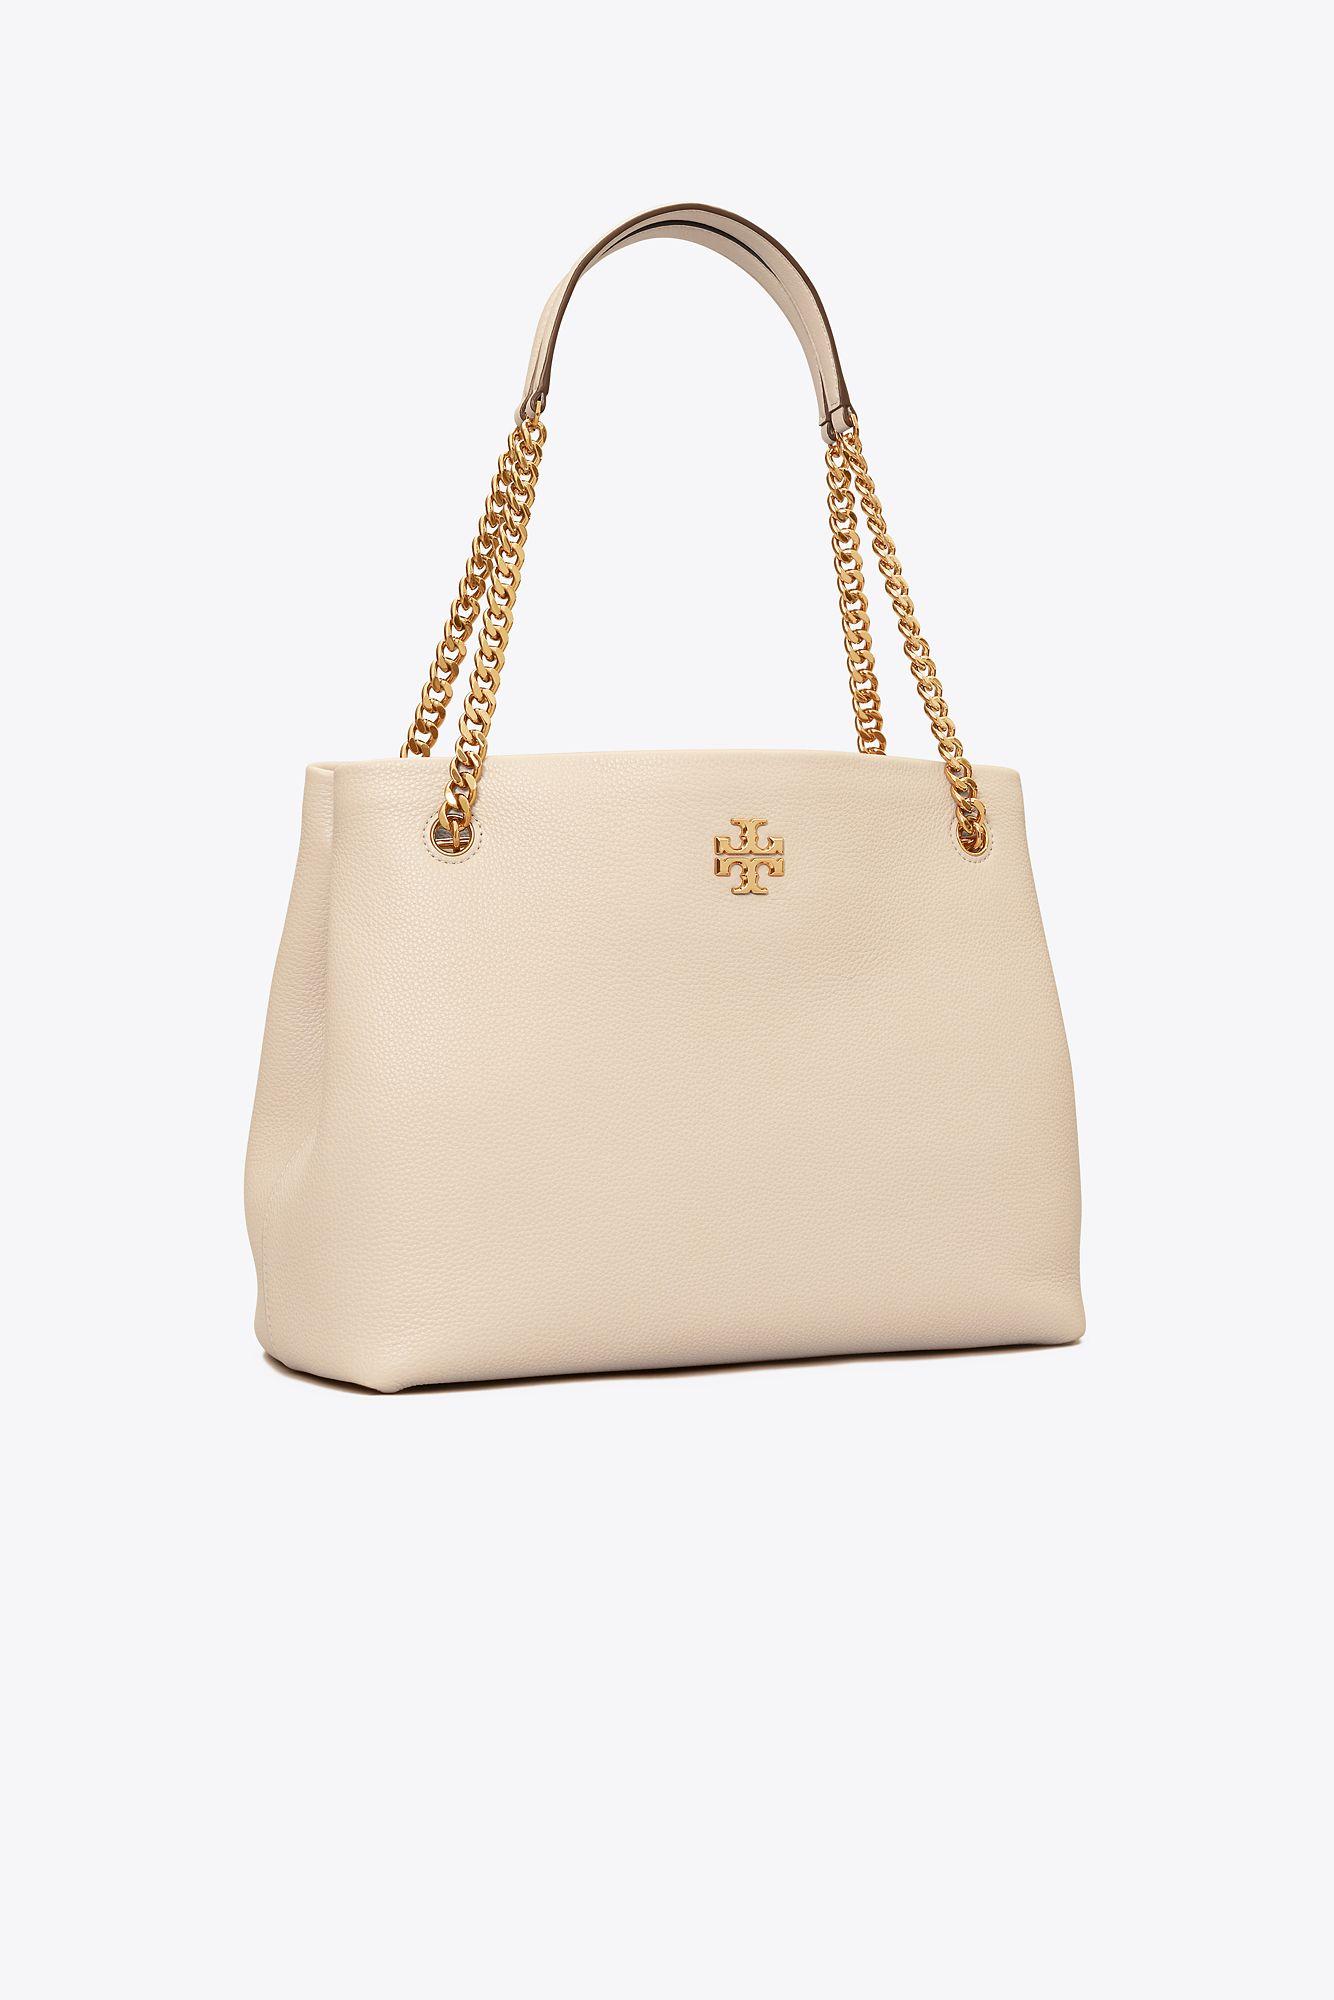 Tory Burch Kira Chevron-quilted Leather Tote Bag In New Cream